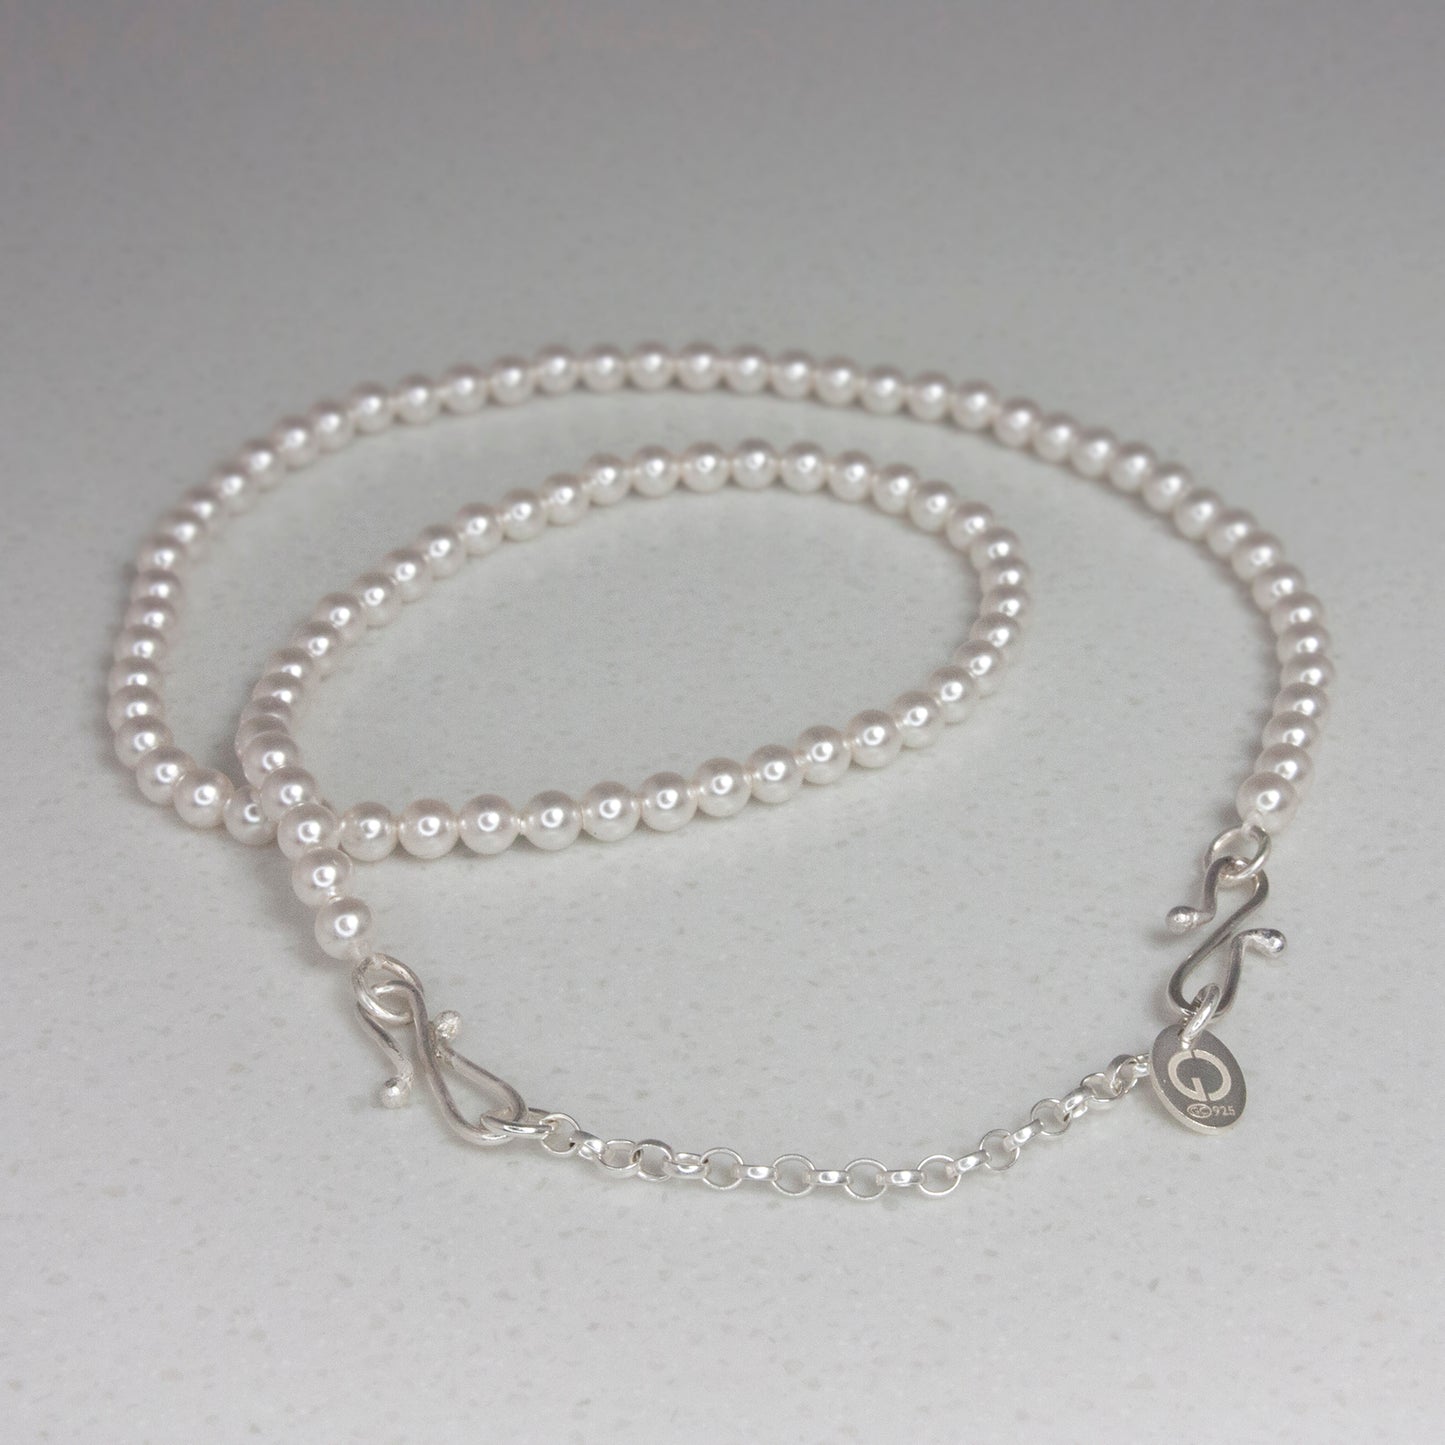 Silver and Crystal Pearl Poppy Bridal headband, converts to a pendant and pearl necklace